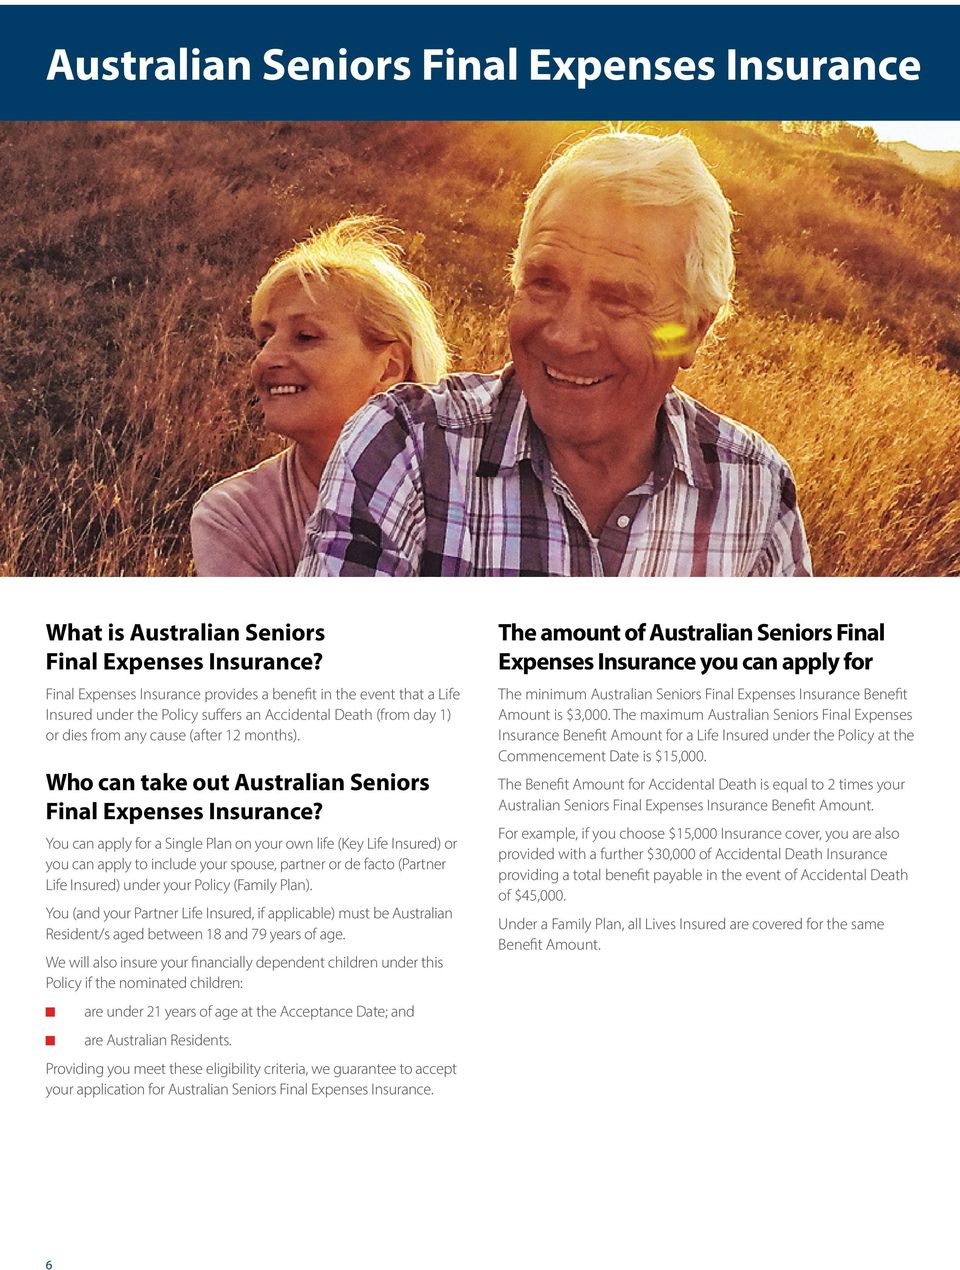 Who can take out Australian Seniors Final Expenses Insurance?